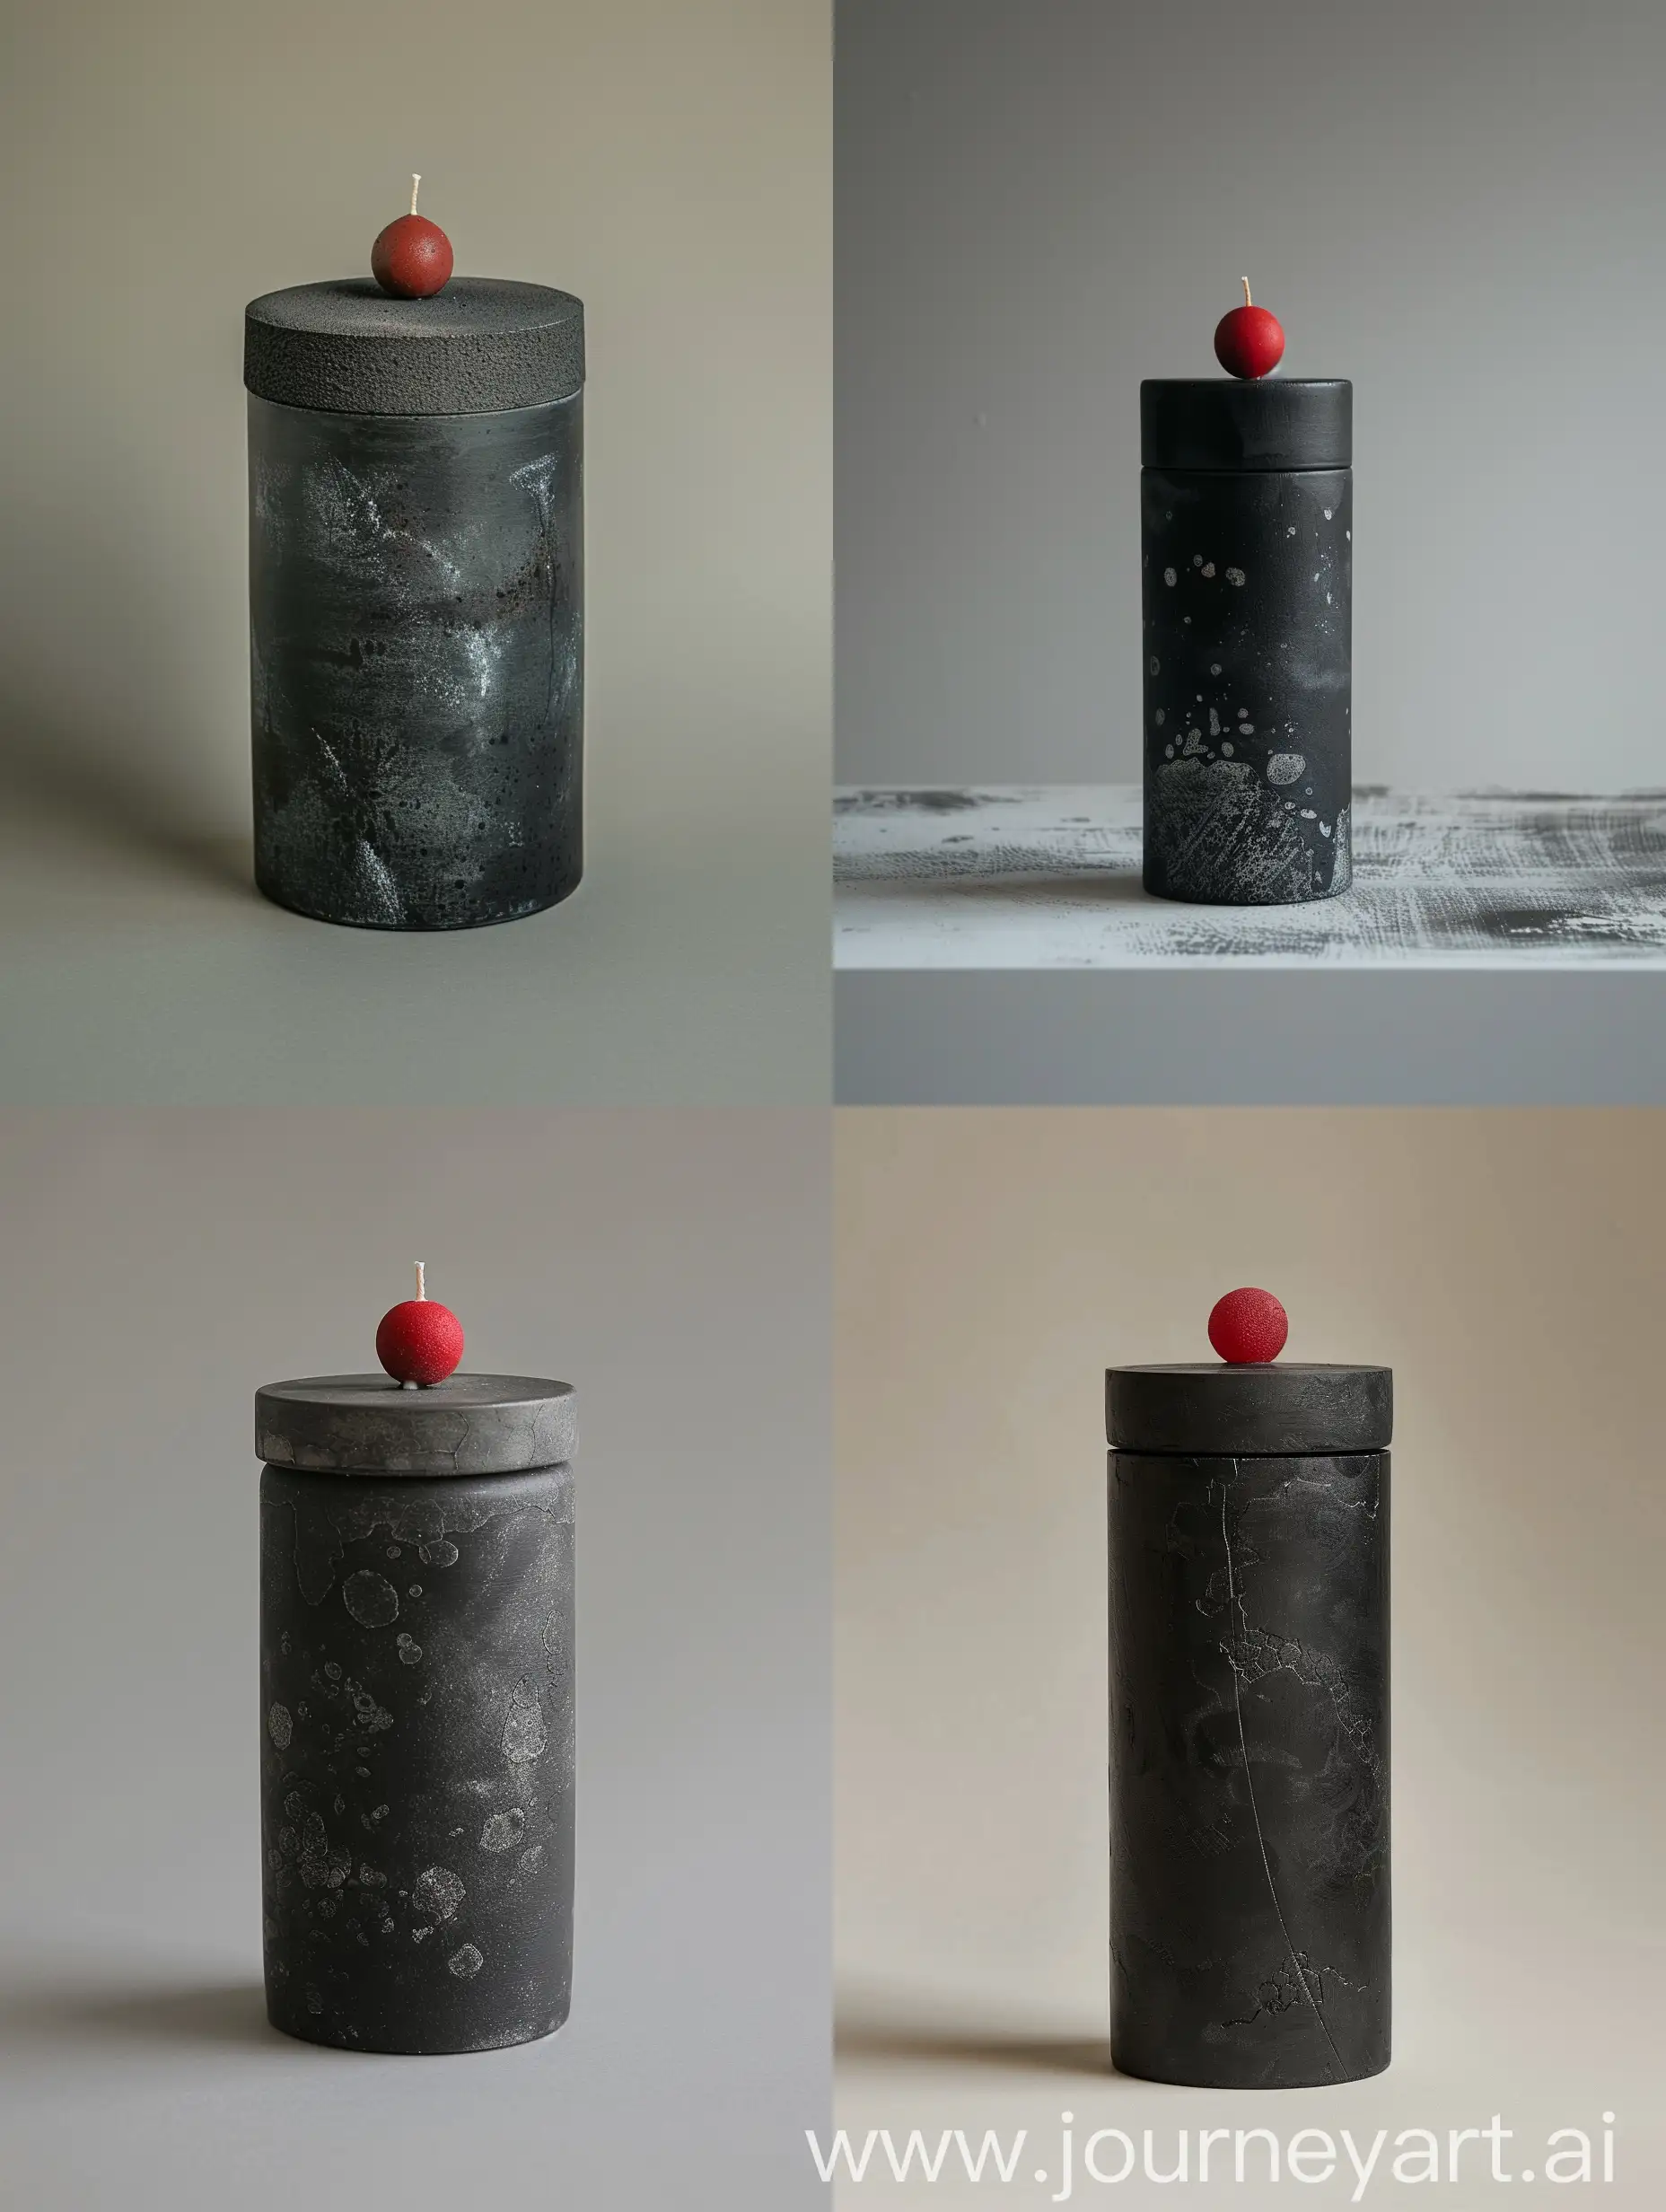 A asthetic, realistic black cyliner cement container has a cap with a single regular-sized red bead-shape on top of its cap, intended to hold a scented candle